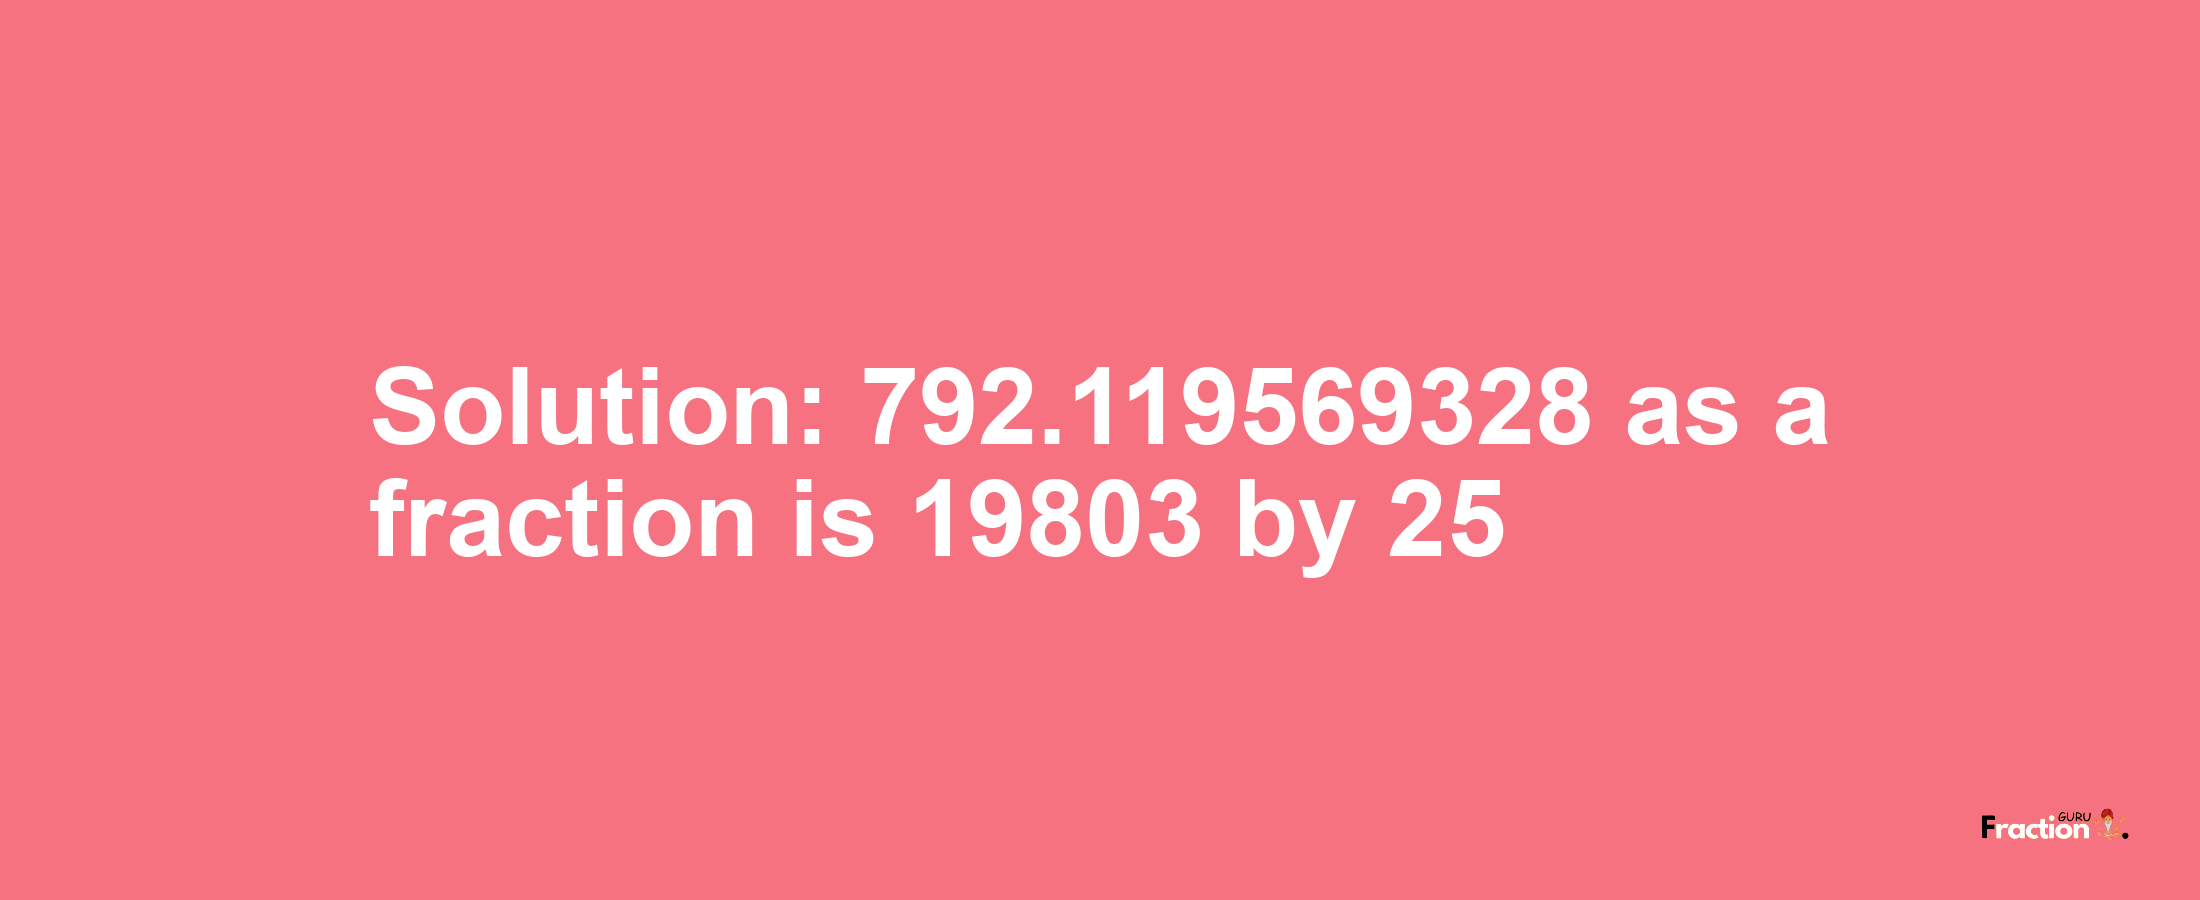 Solution:792.119569328 as a fraction is 19803/25